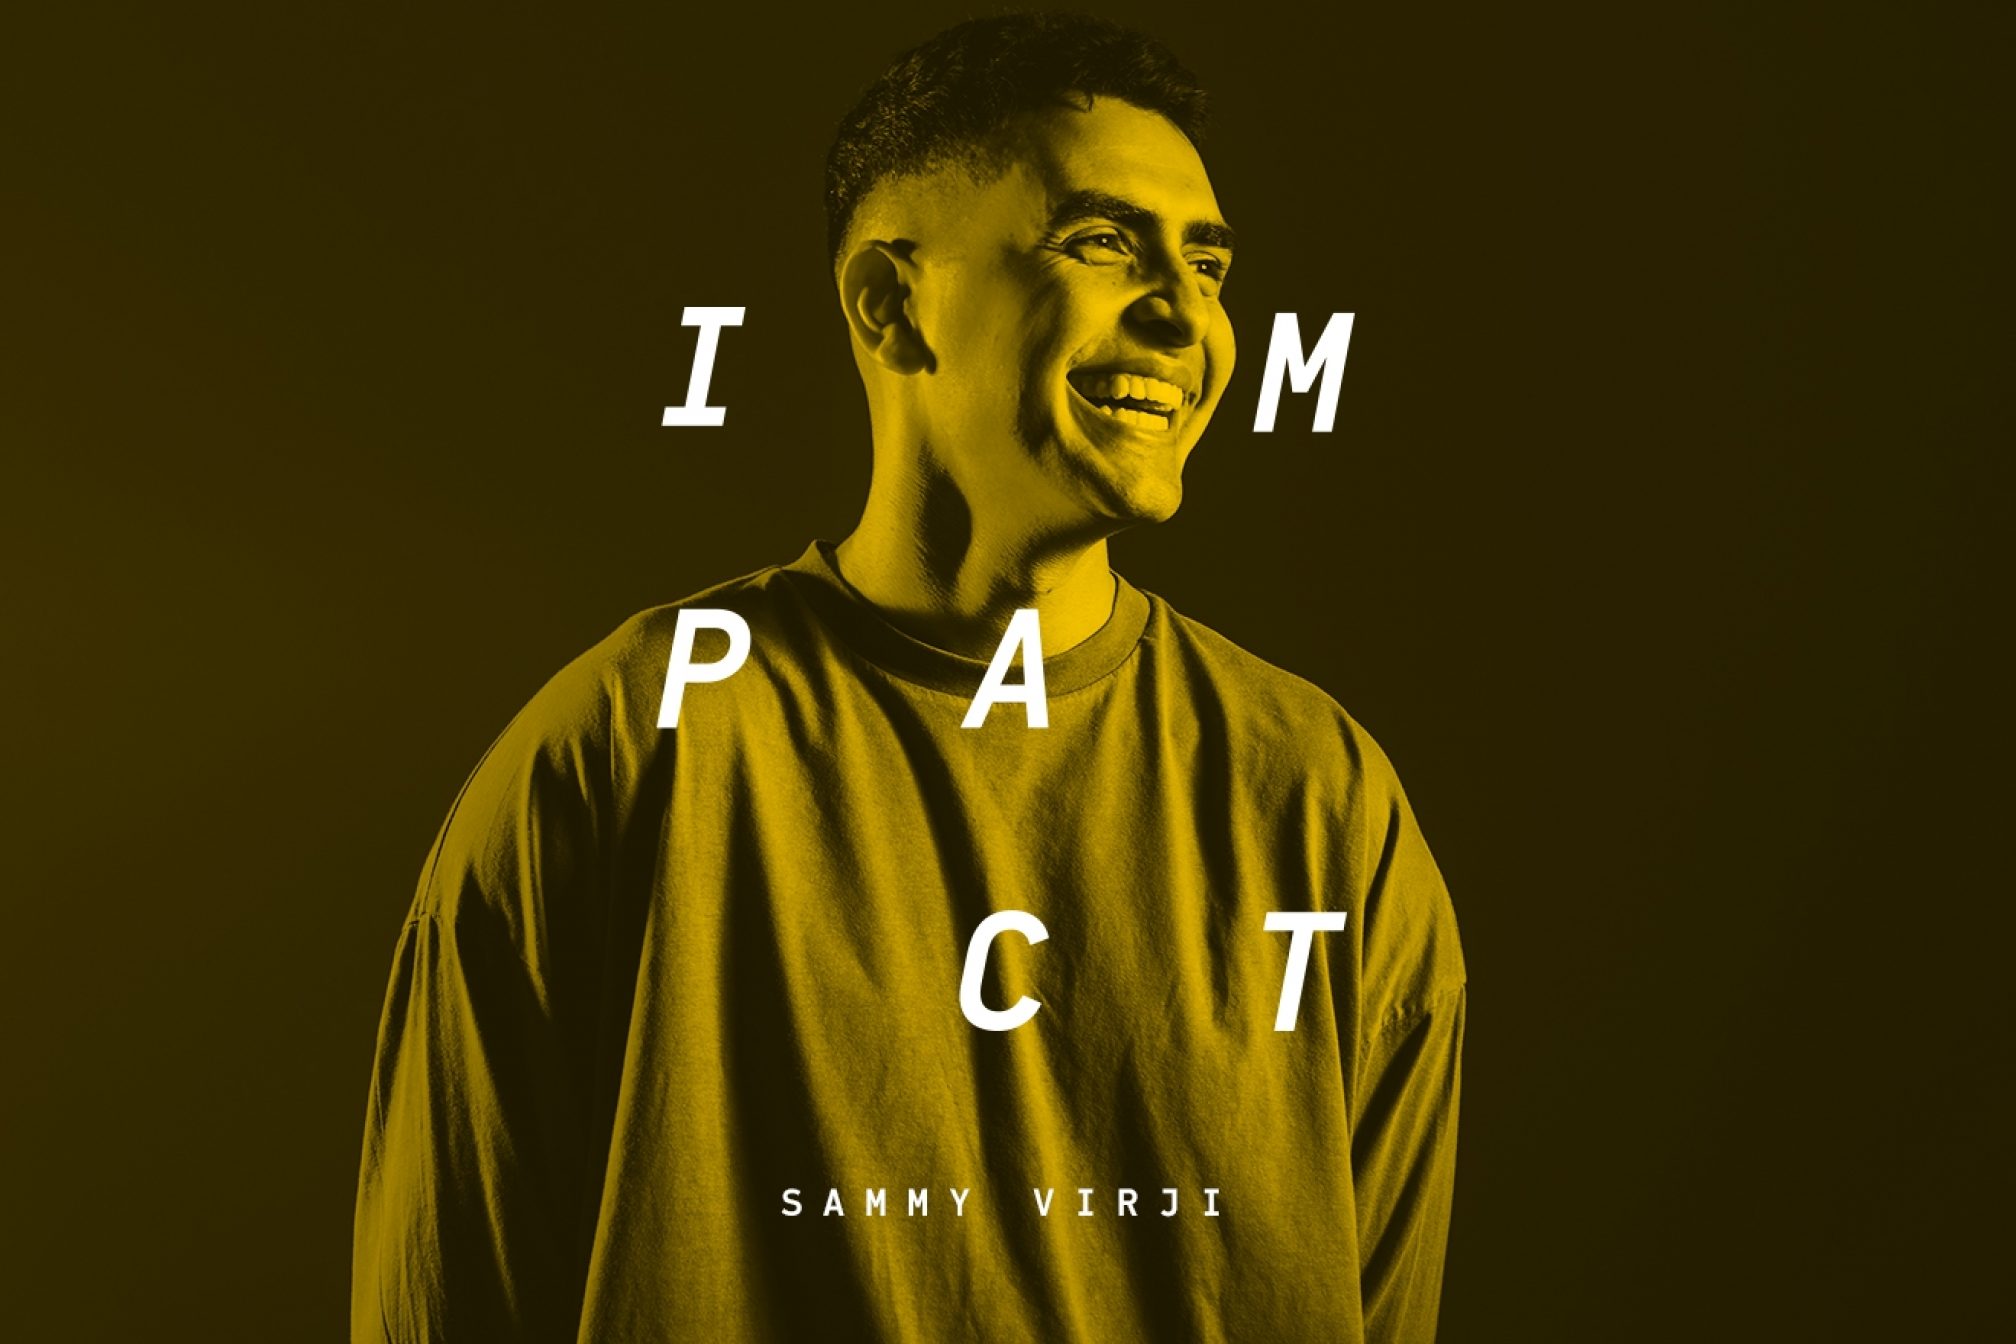 Sammy Virji's UKG is the soundtrack to a perfect summer - Impact